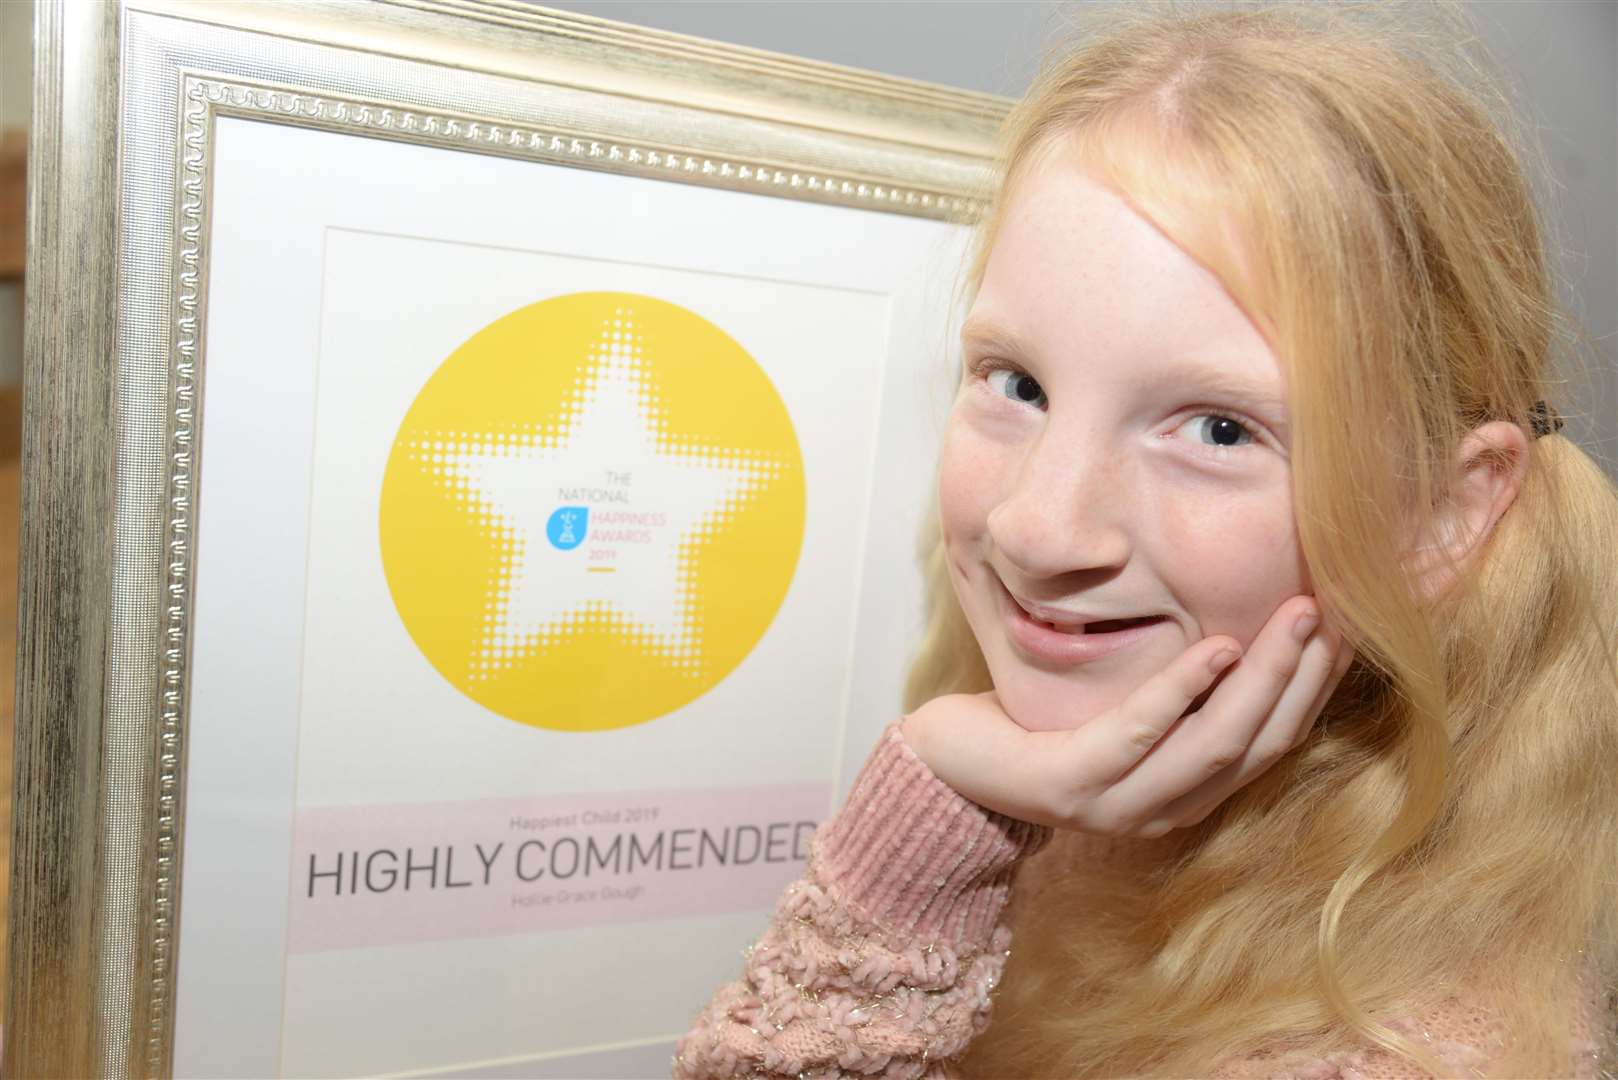 Hollie-Grace was a runner up in the Happiest Child category of the National Happiness Awards